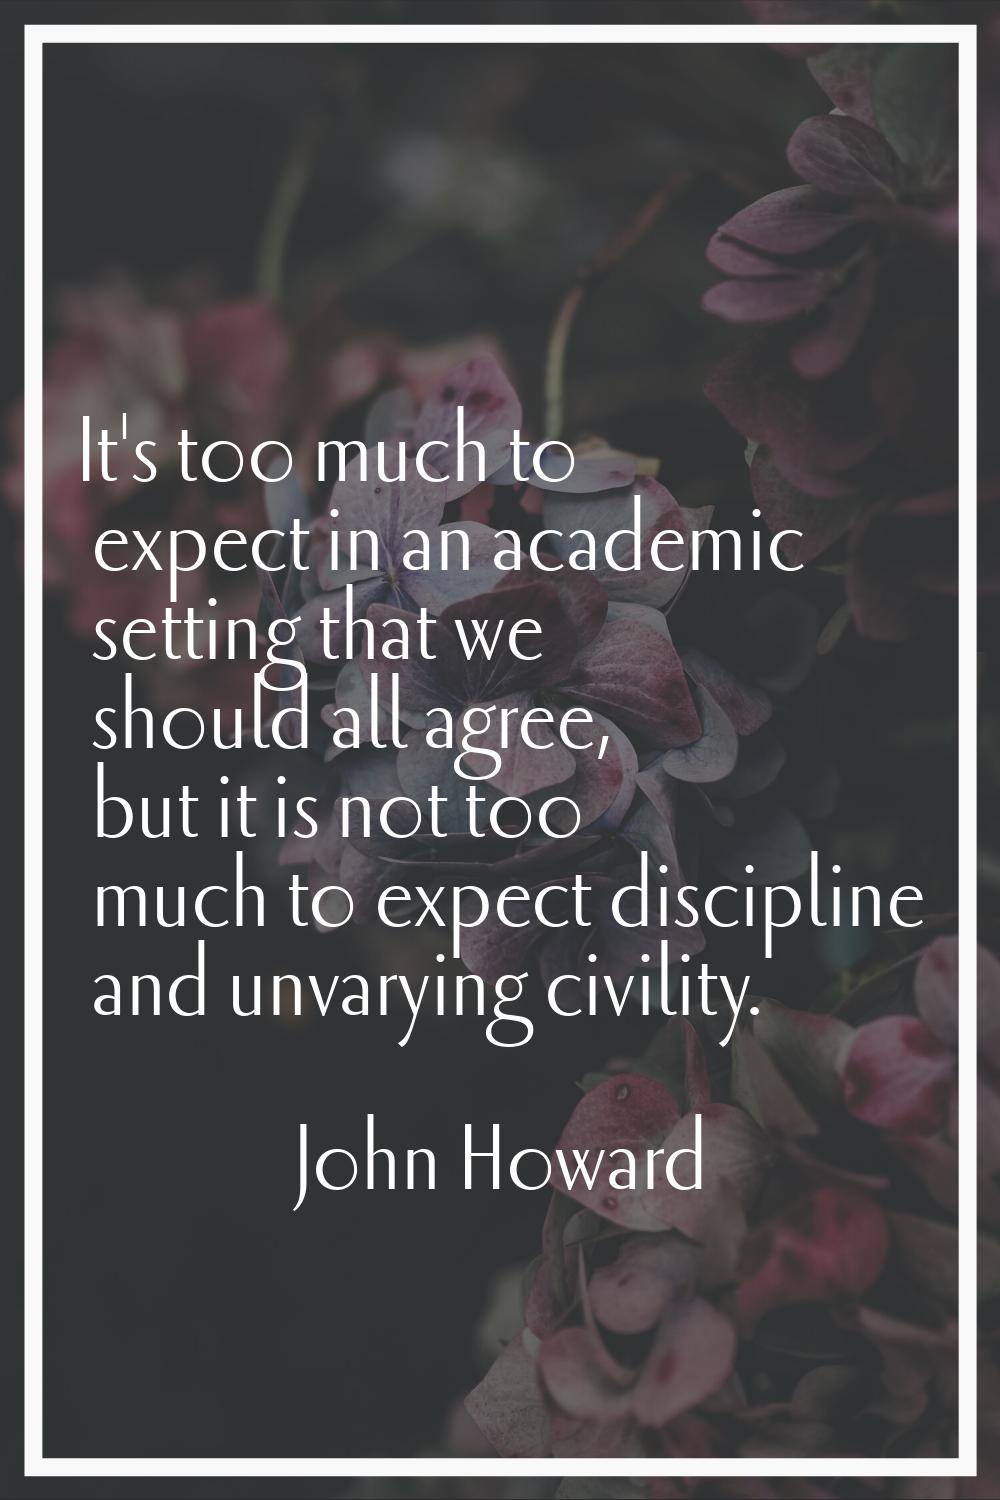 It's too much to expect in an academic setting that we should all agree, but it is not too much to 